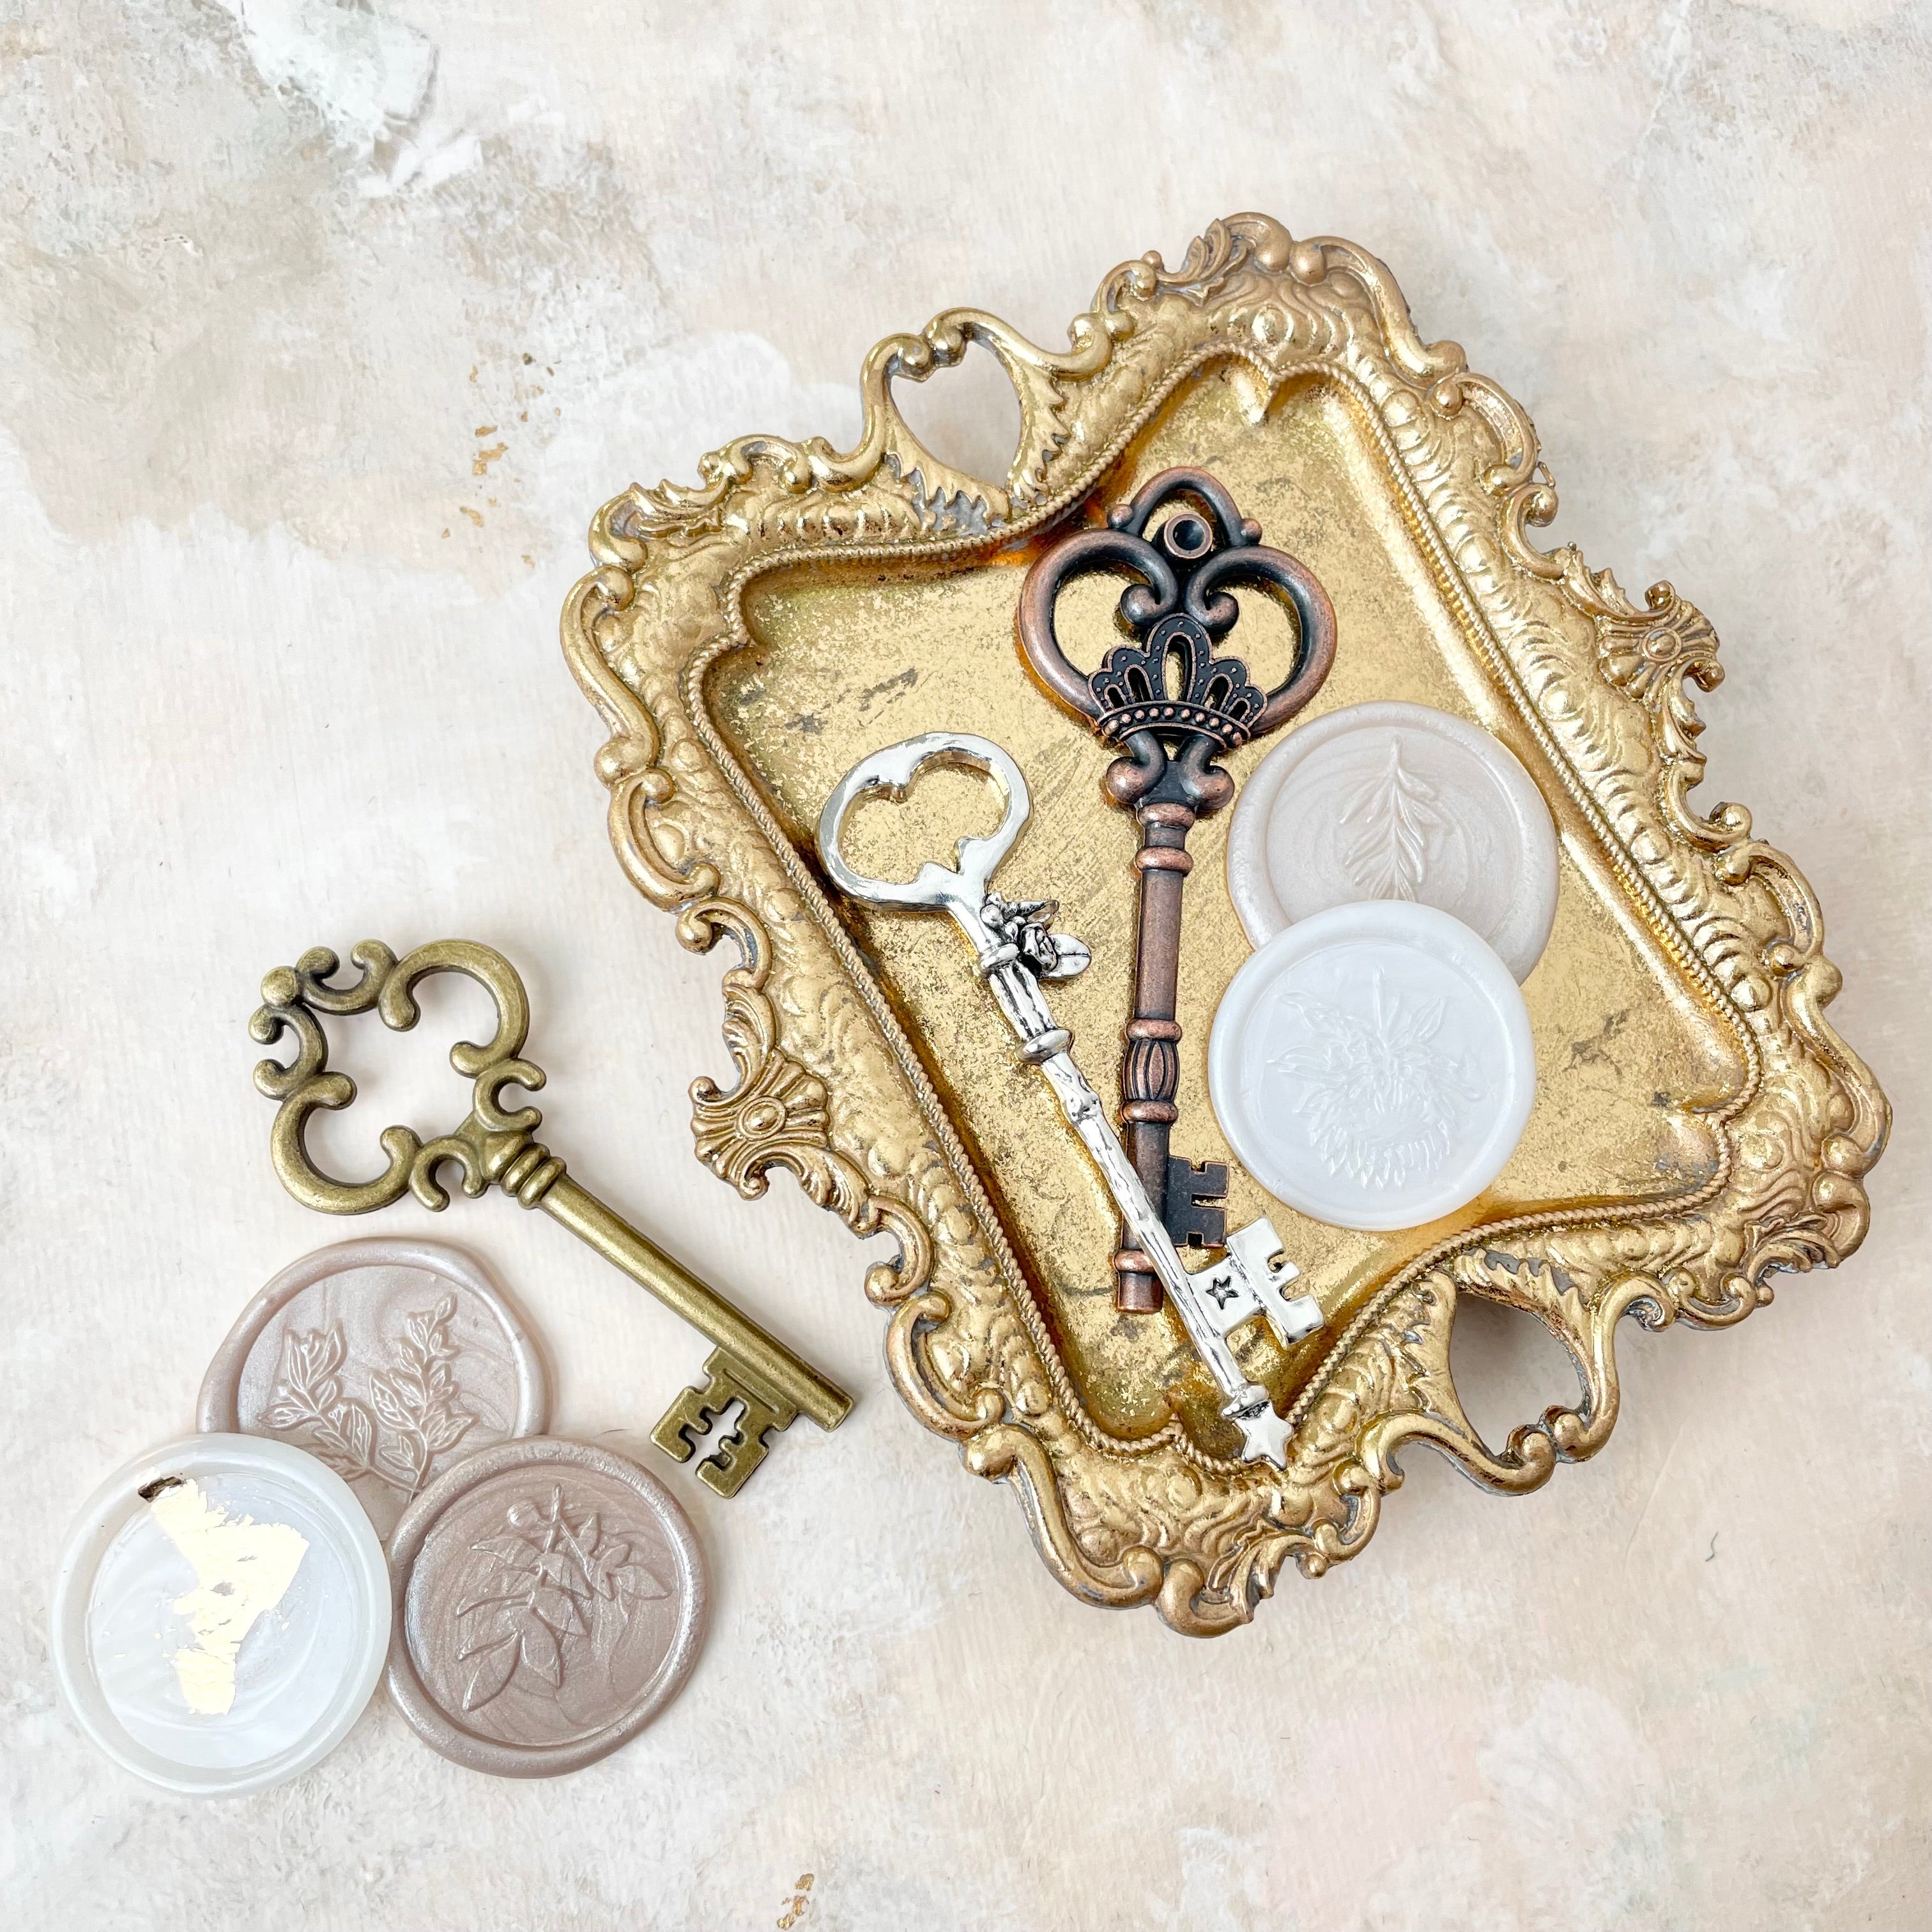 Styling Keys and wax seals in gold vintage tray - Wedding Flat lay props from Champagne & GRIT